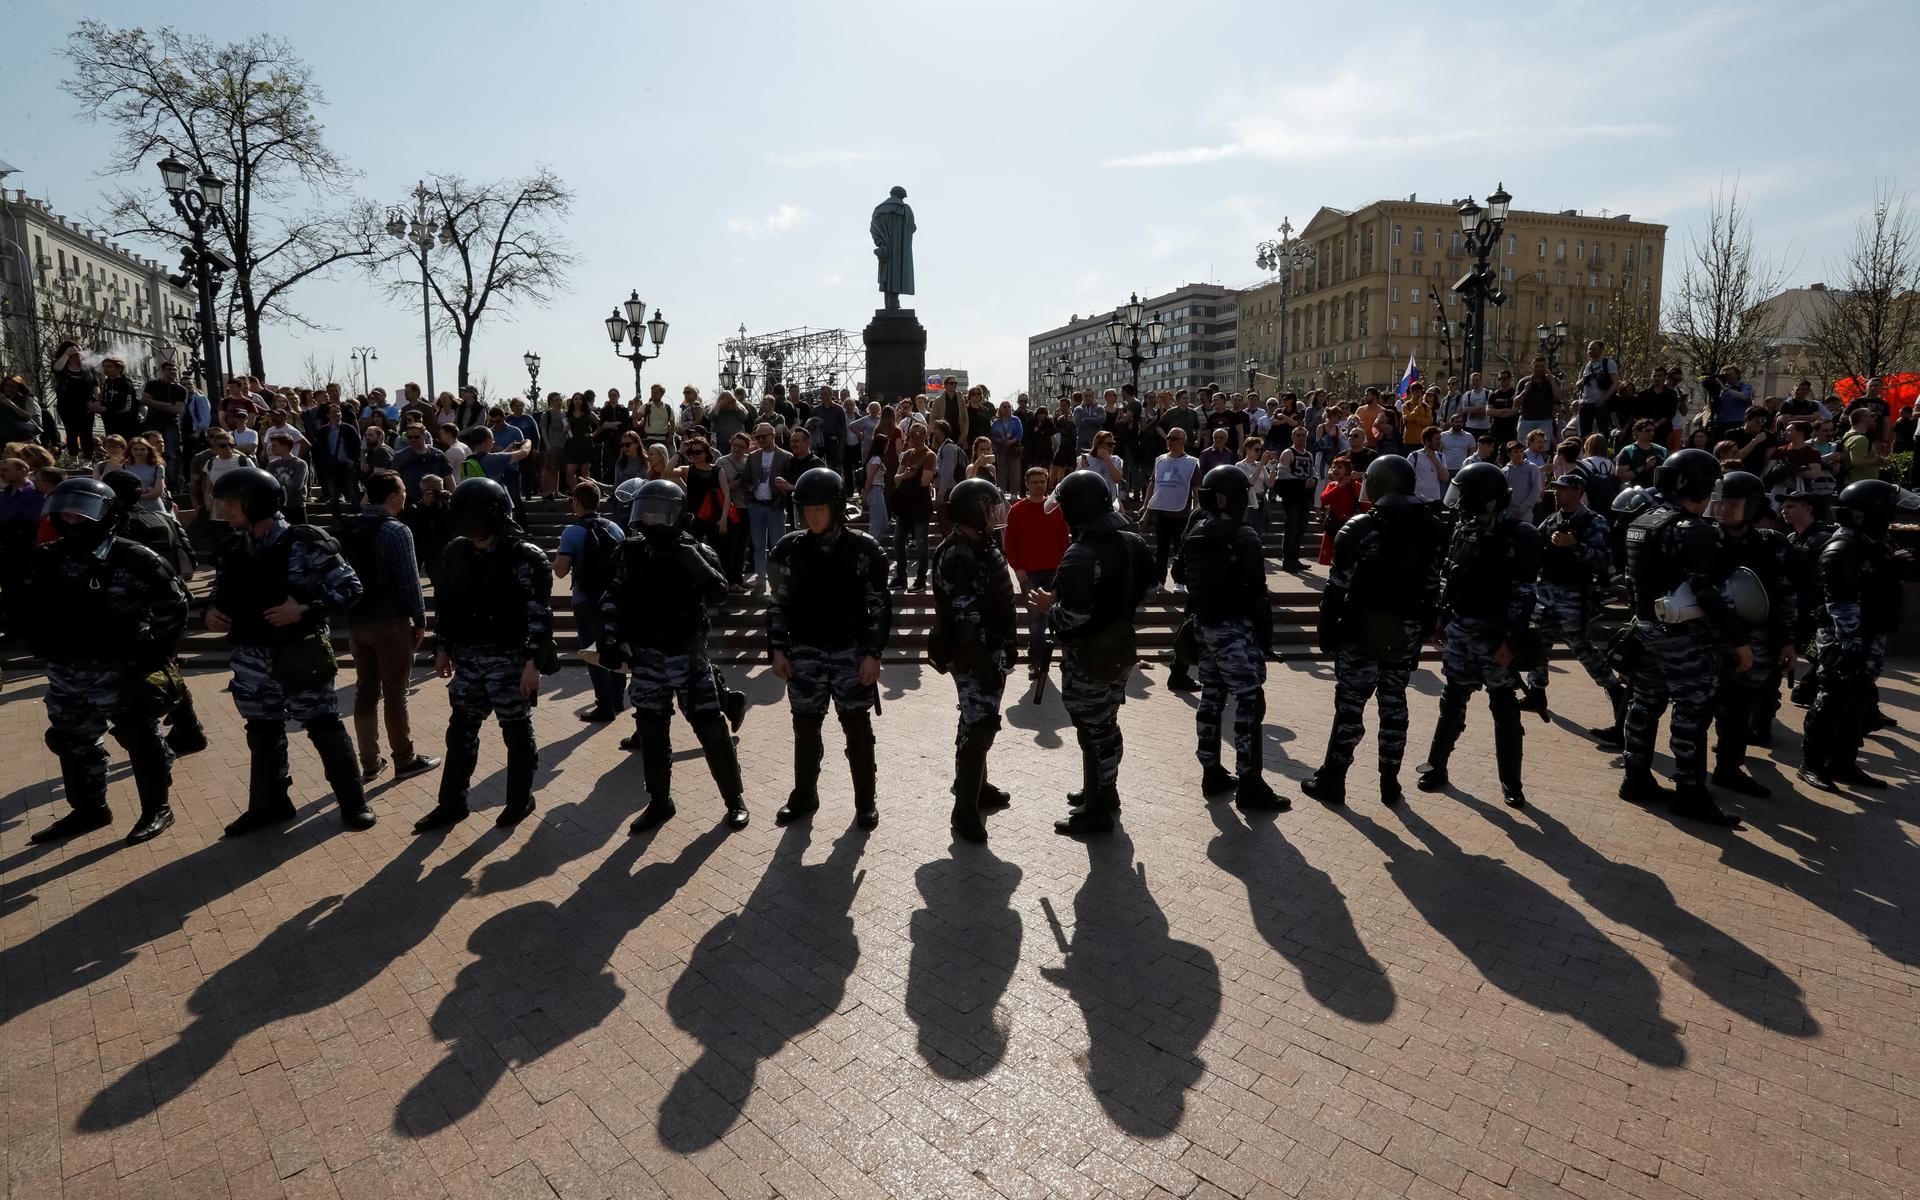 Police officers in riot gear block an area during an opposition protest rally ahead of Vladimir Putin's inauguration ceremony, next to the monument to Russian poet Alexander Pushkin, in Moscow, Russia, May 5, 2018.